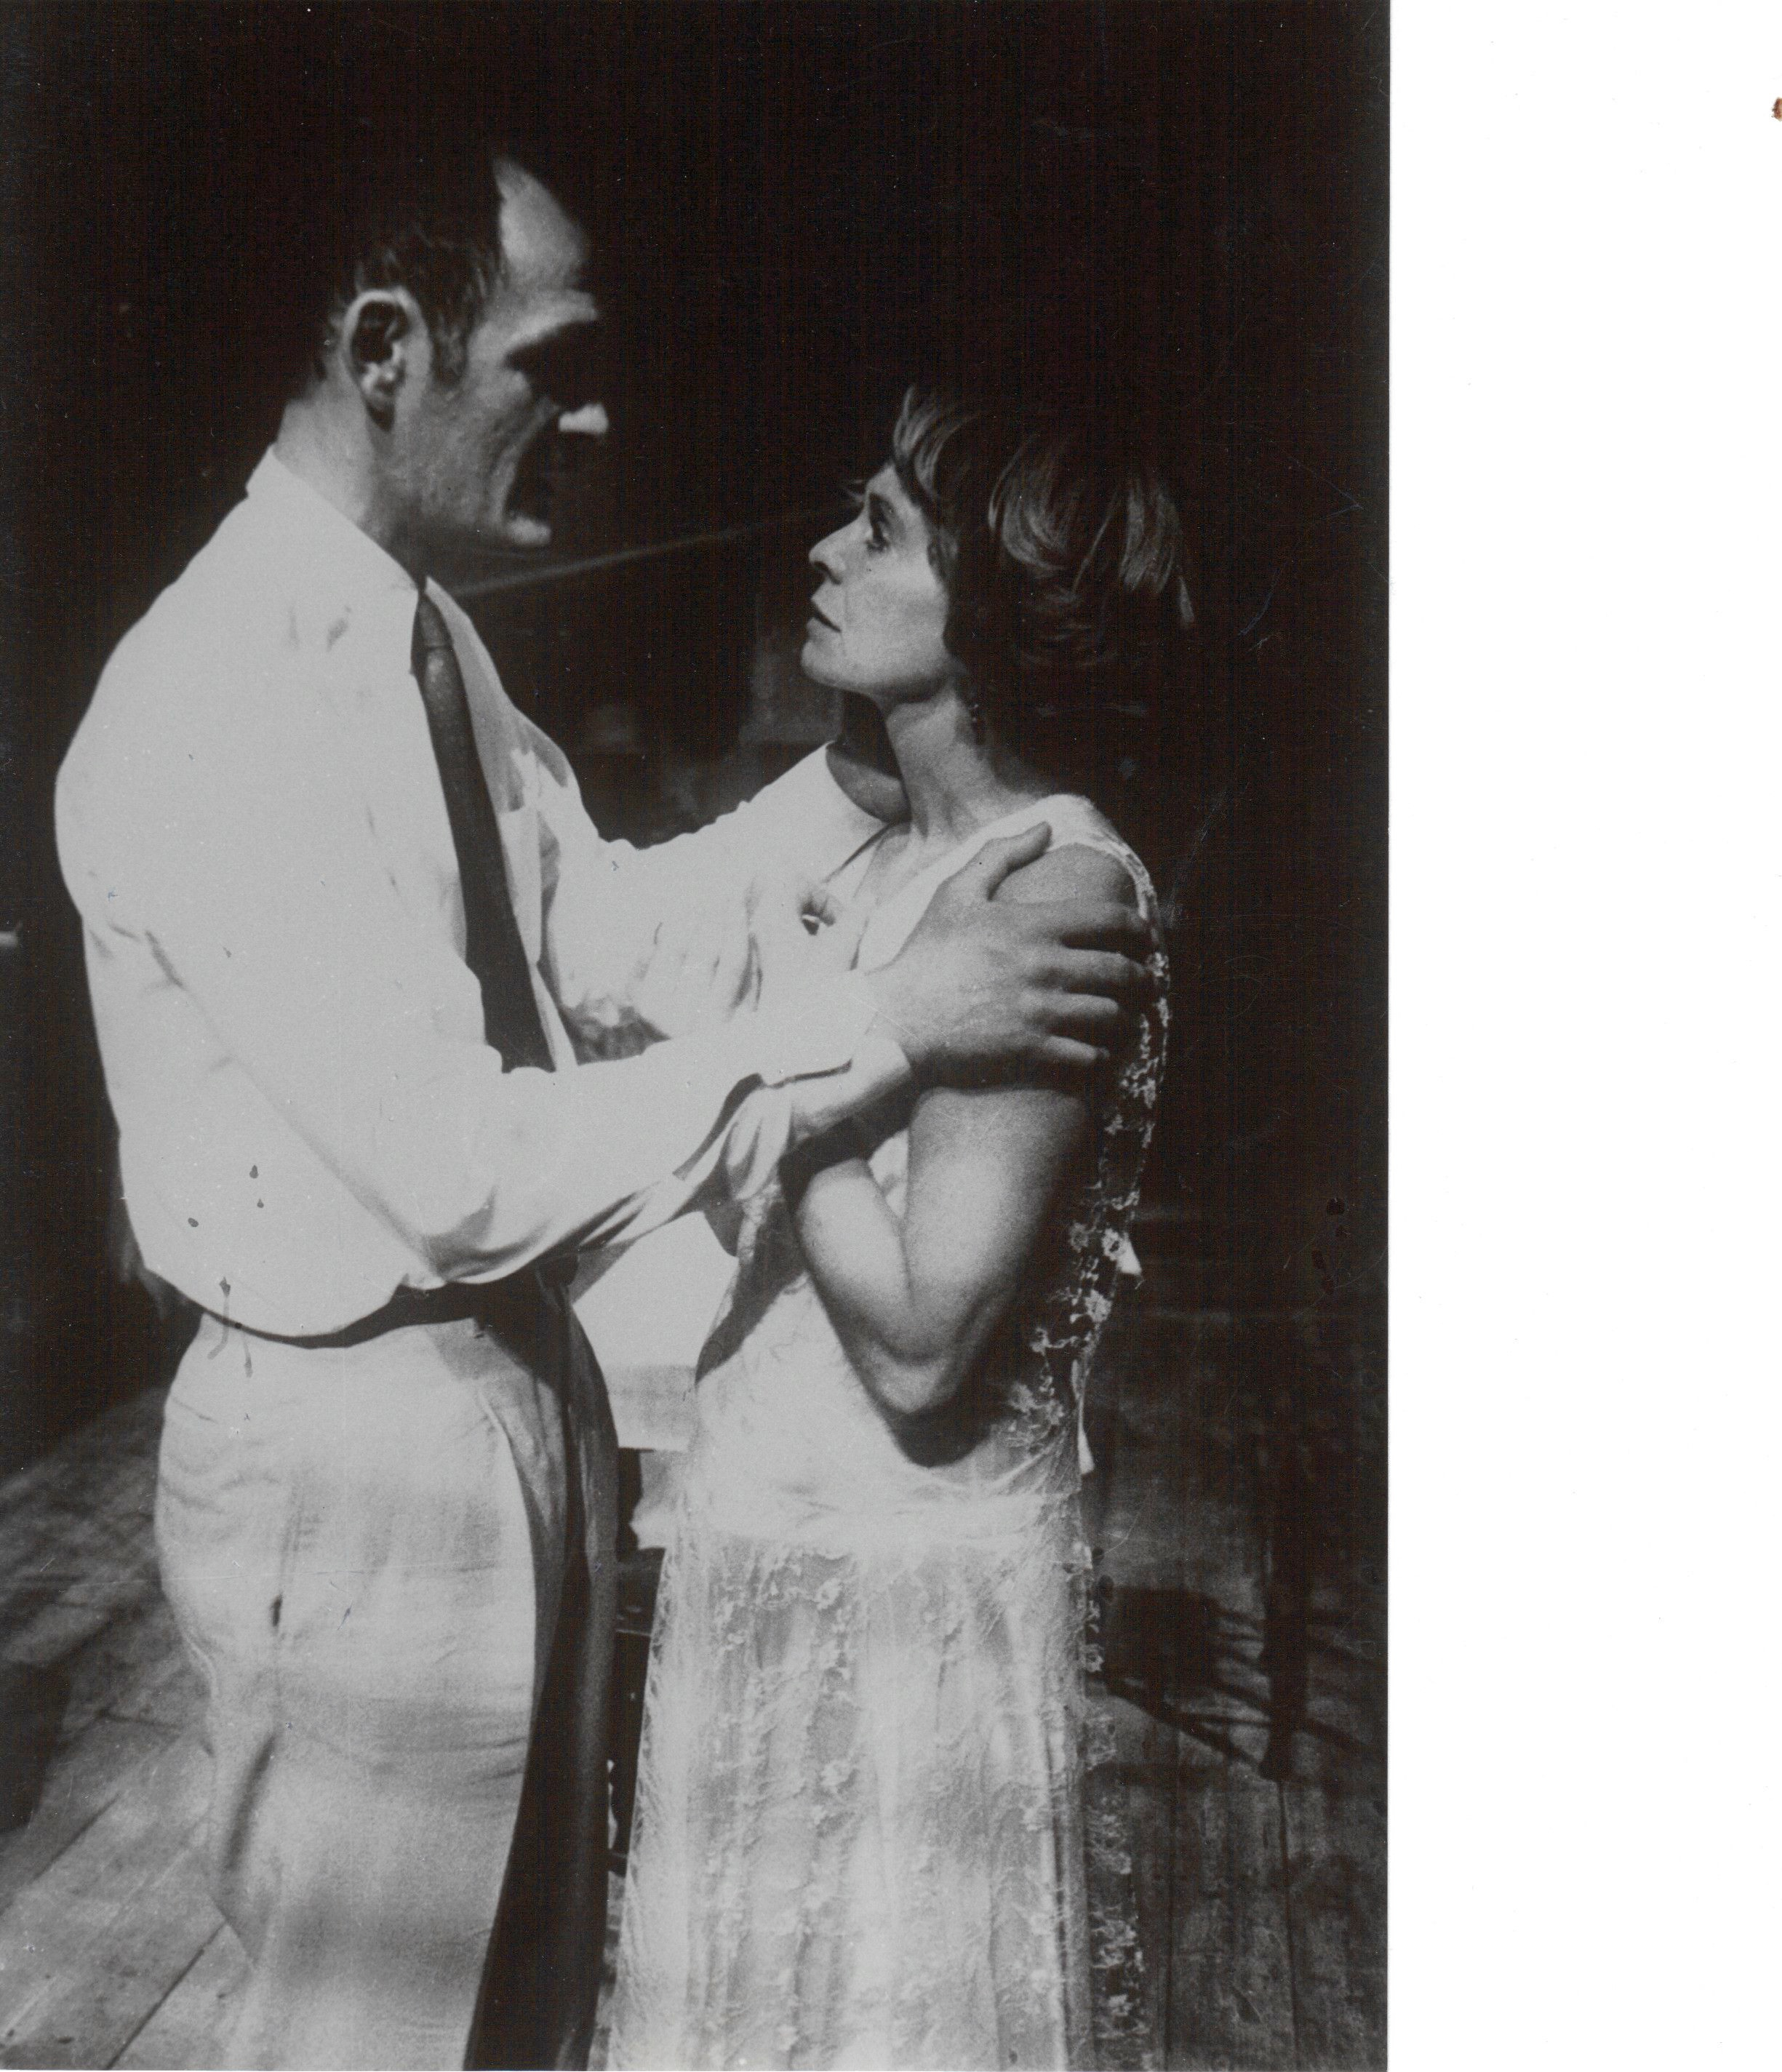 JSR with Susannah York in the UK production of Streetcar Named Desire